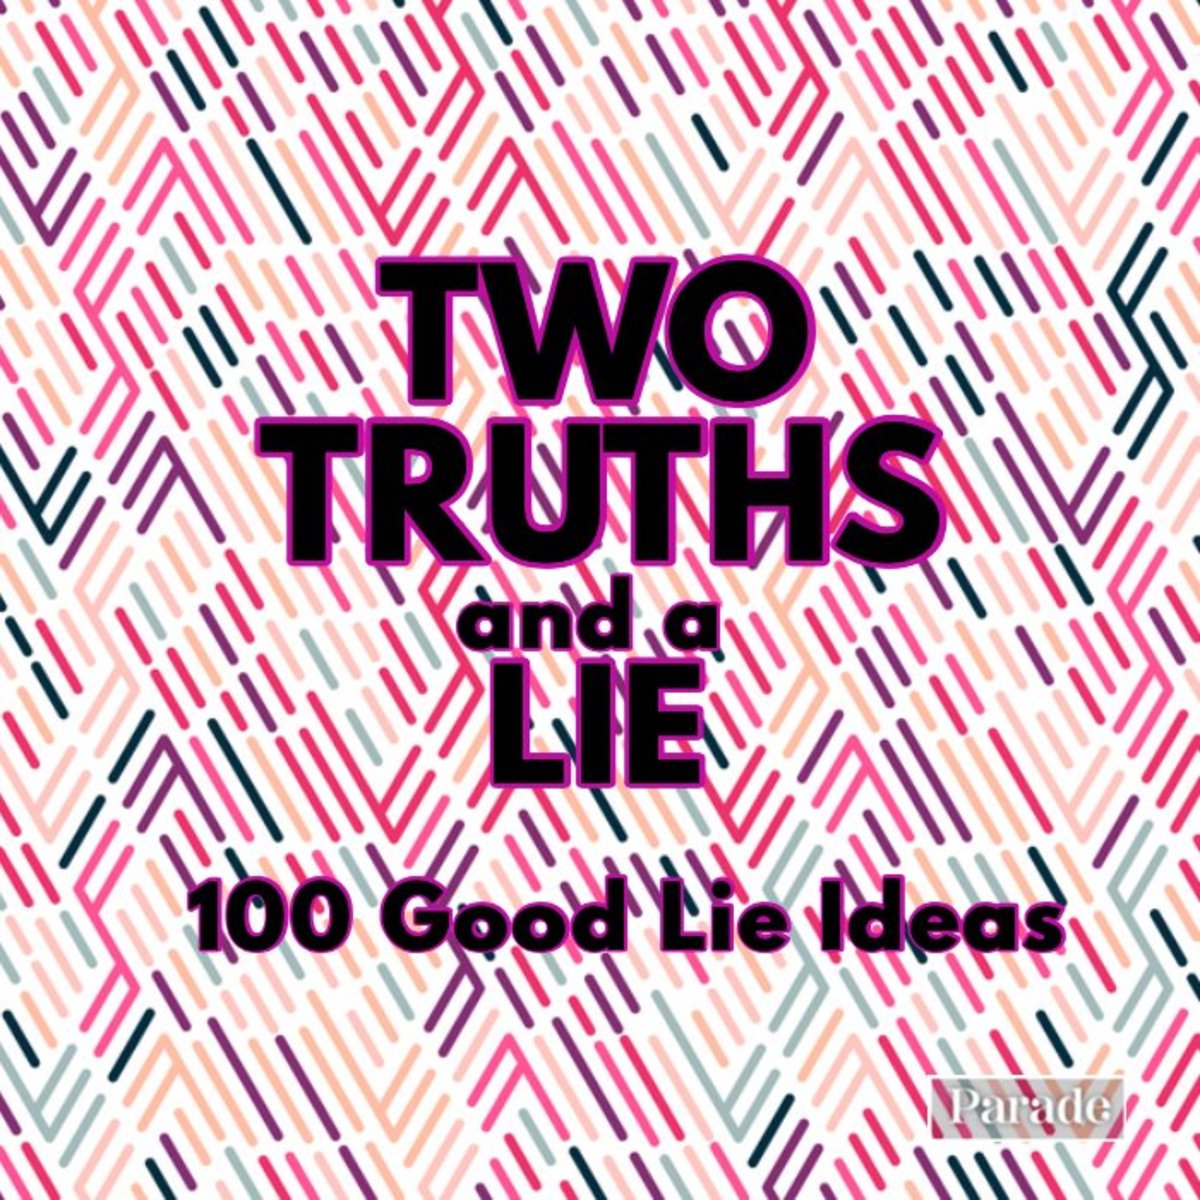 2 truths and 1 lie examples